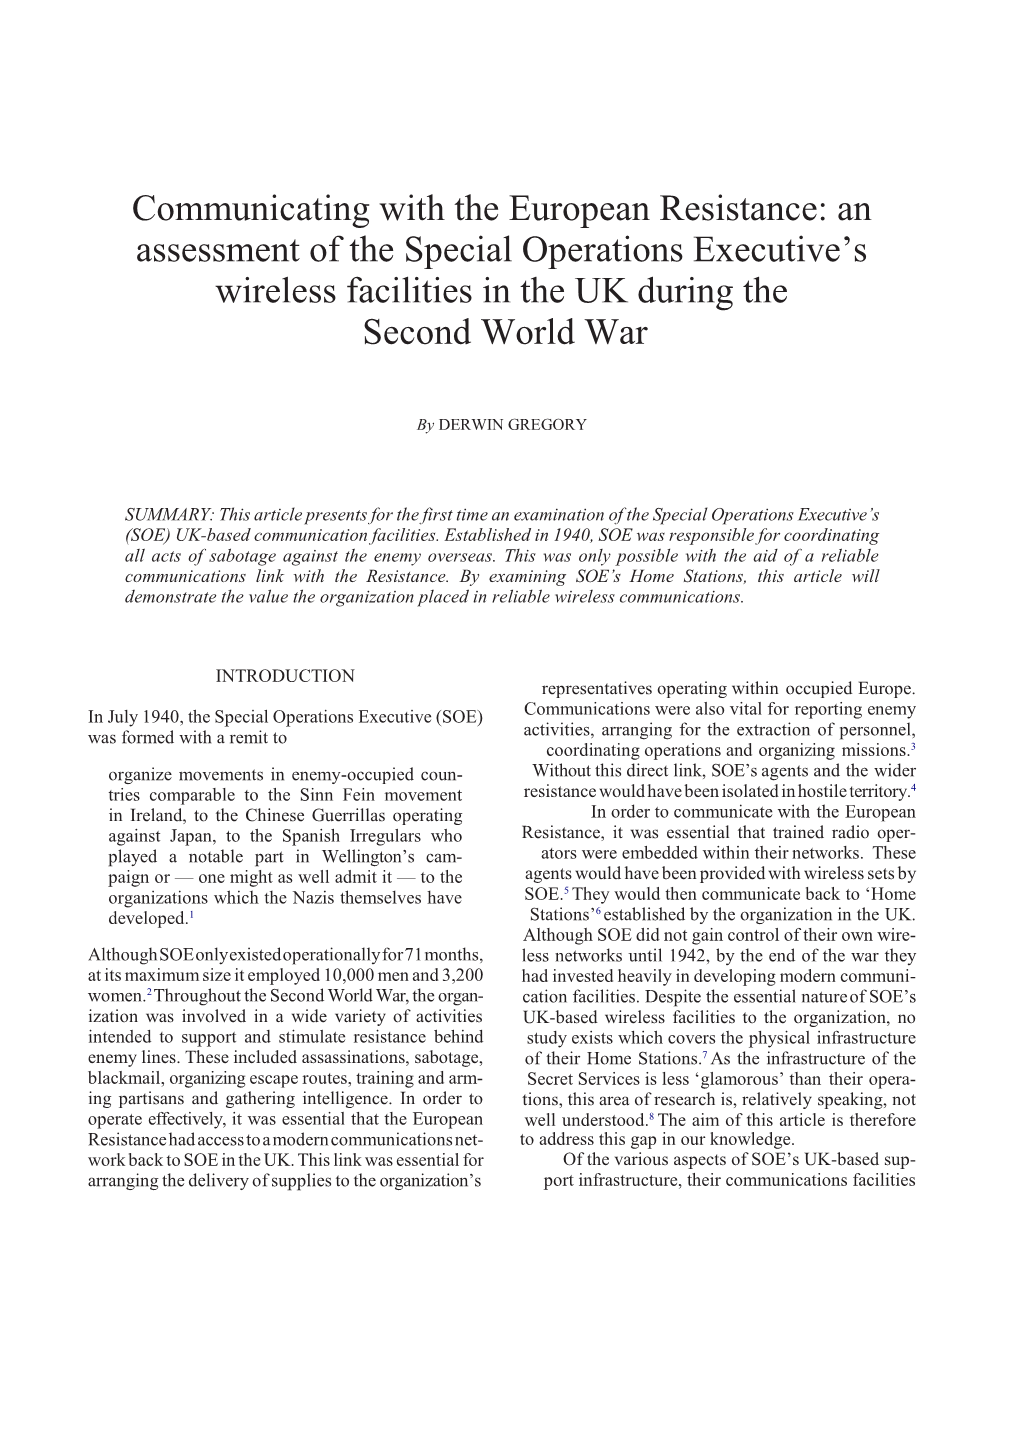 An Assessment of the Special Operations Executive's Wireless